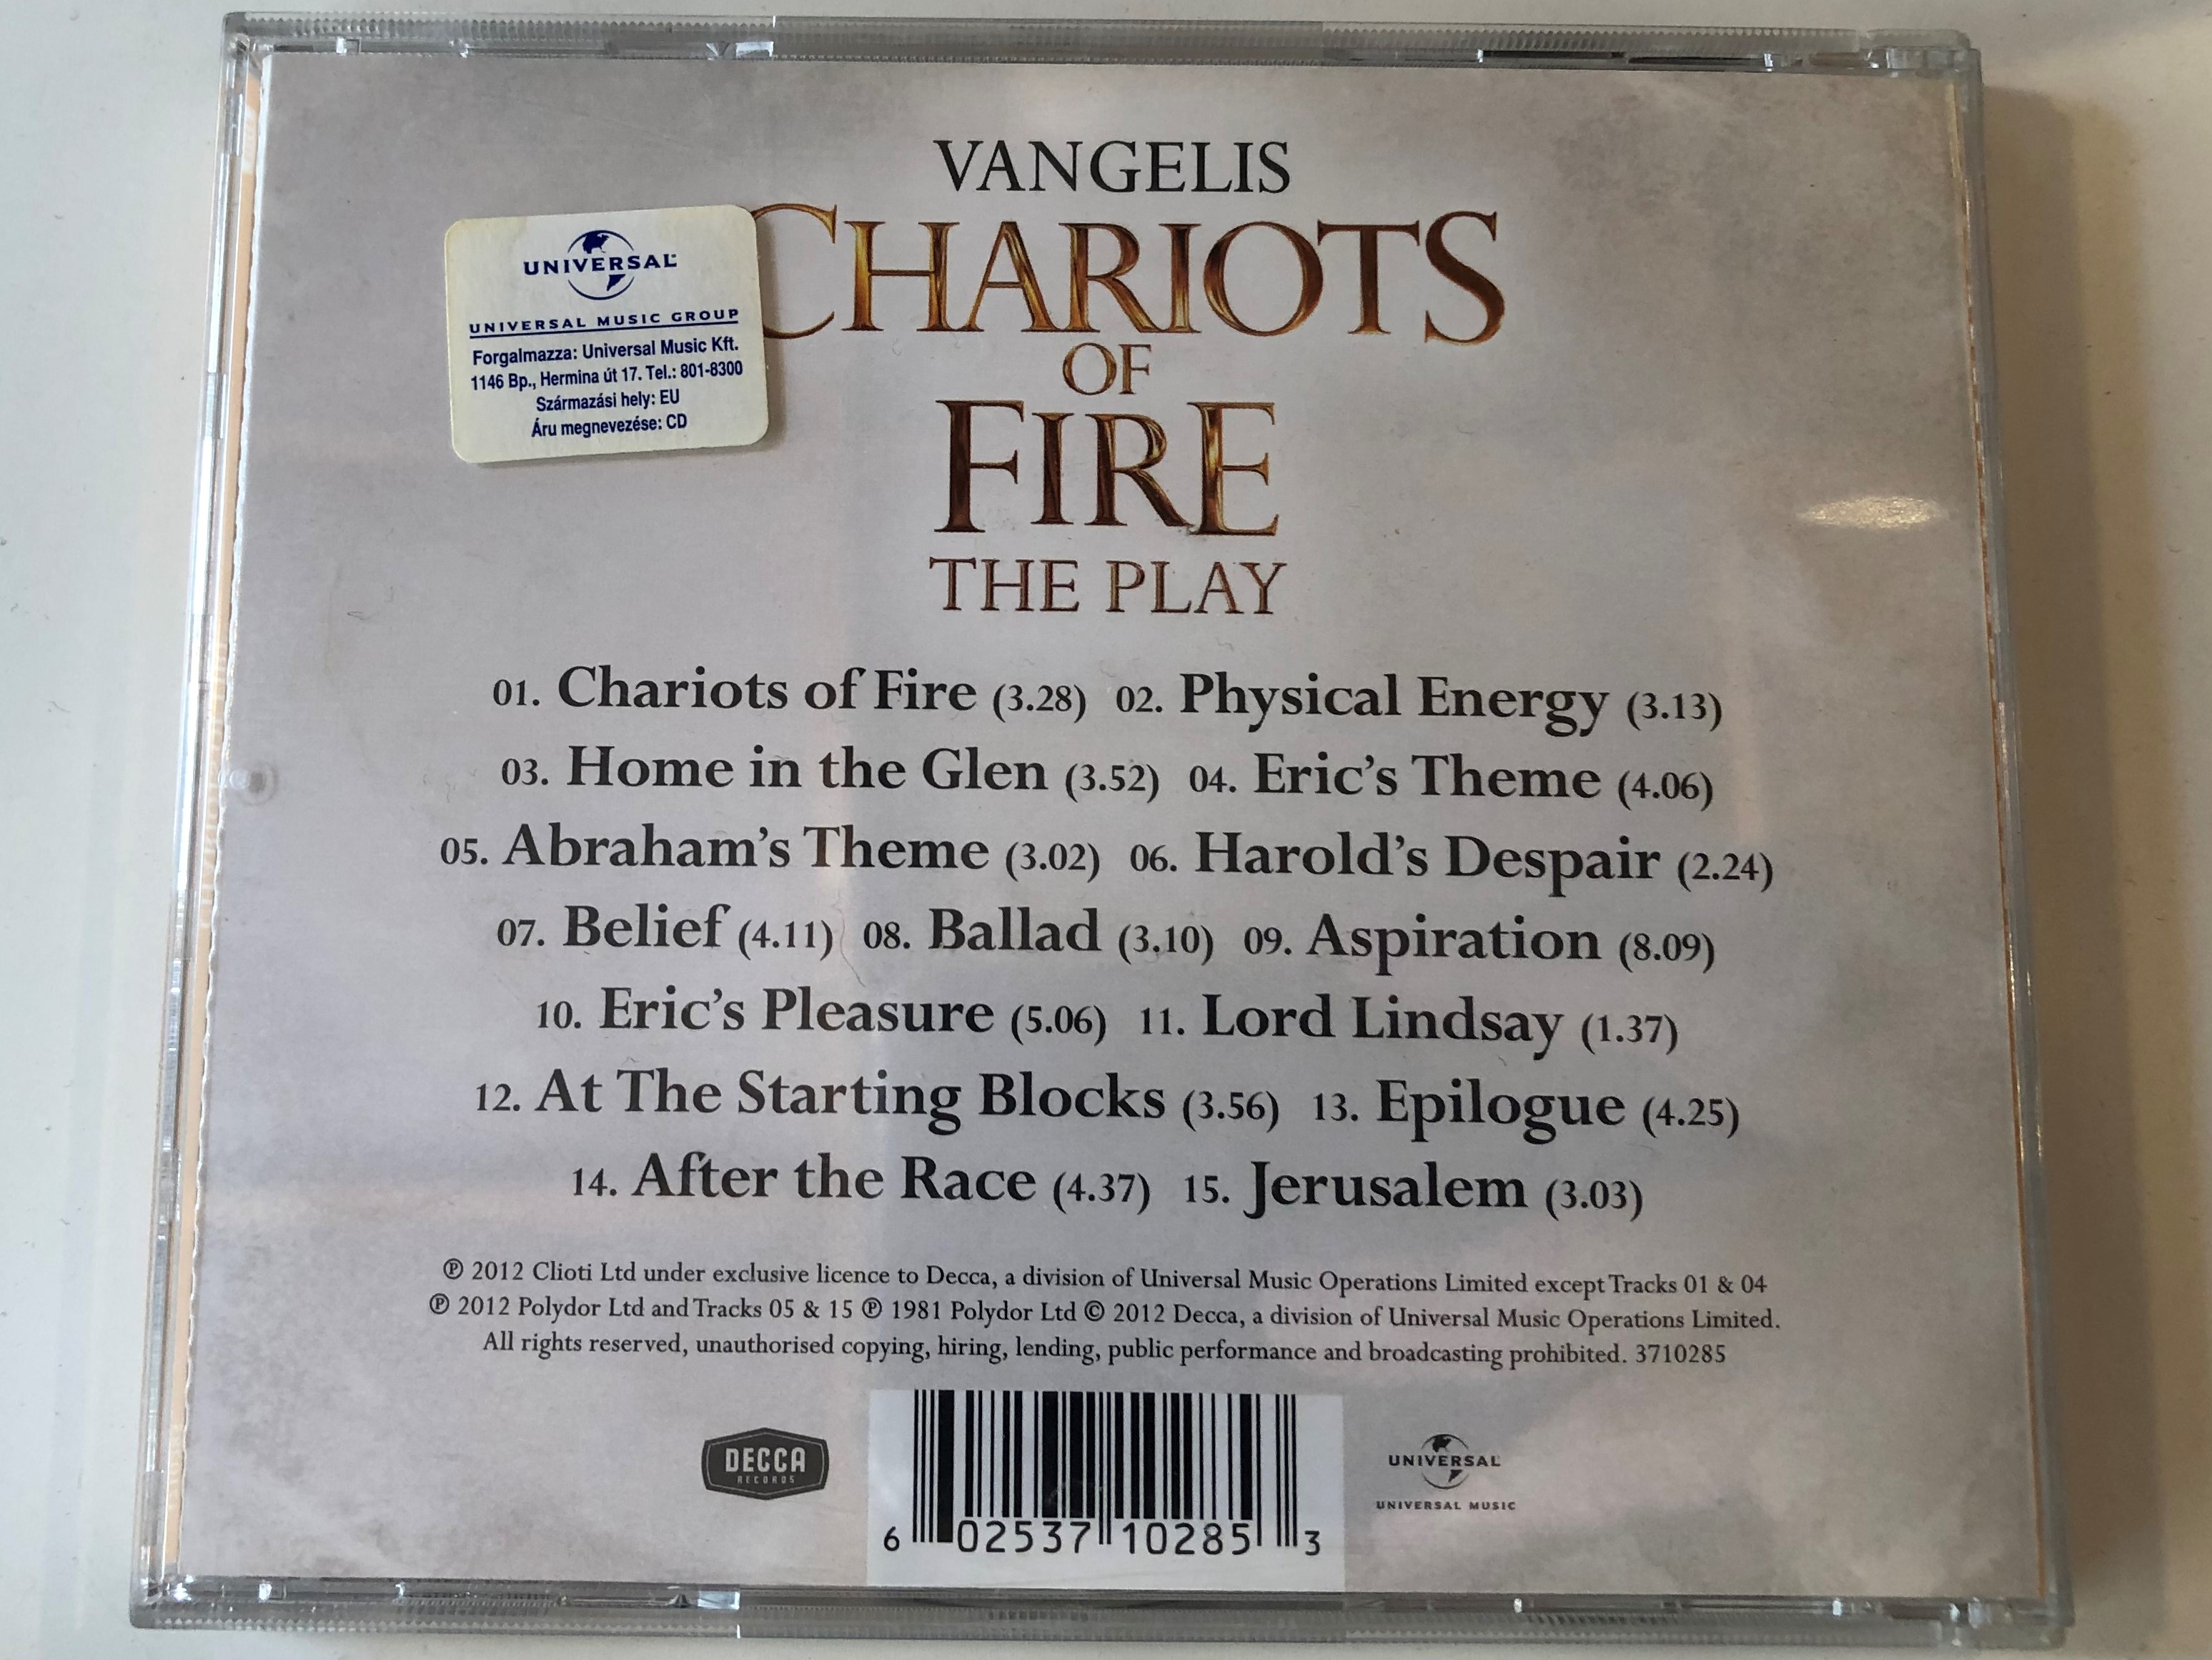 vangelis-chariots-of-fire-the-play-music-from-the-stage-show-featuring-the-iconic-original-score-and-new-music-by-vangelis-decca-audio-cd-2012-3710285-4-.jpg